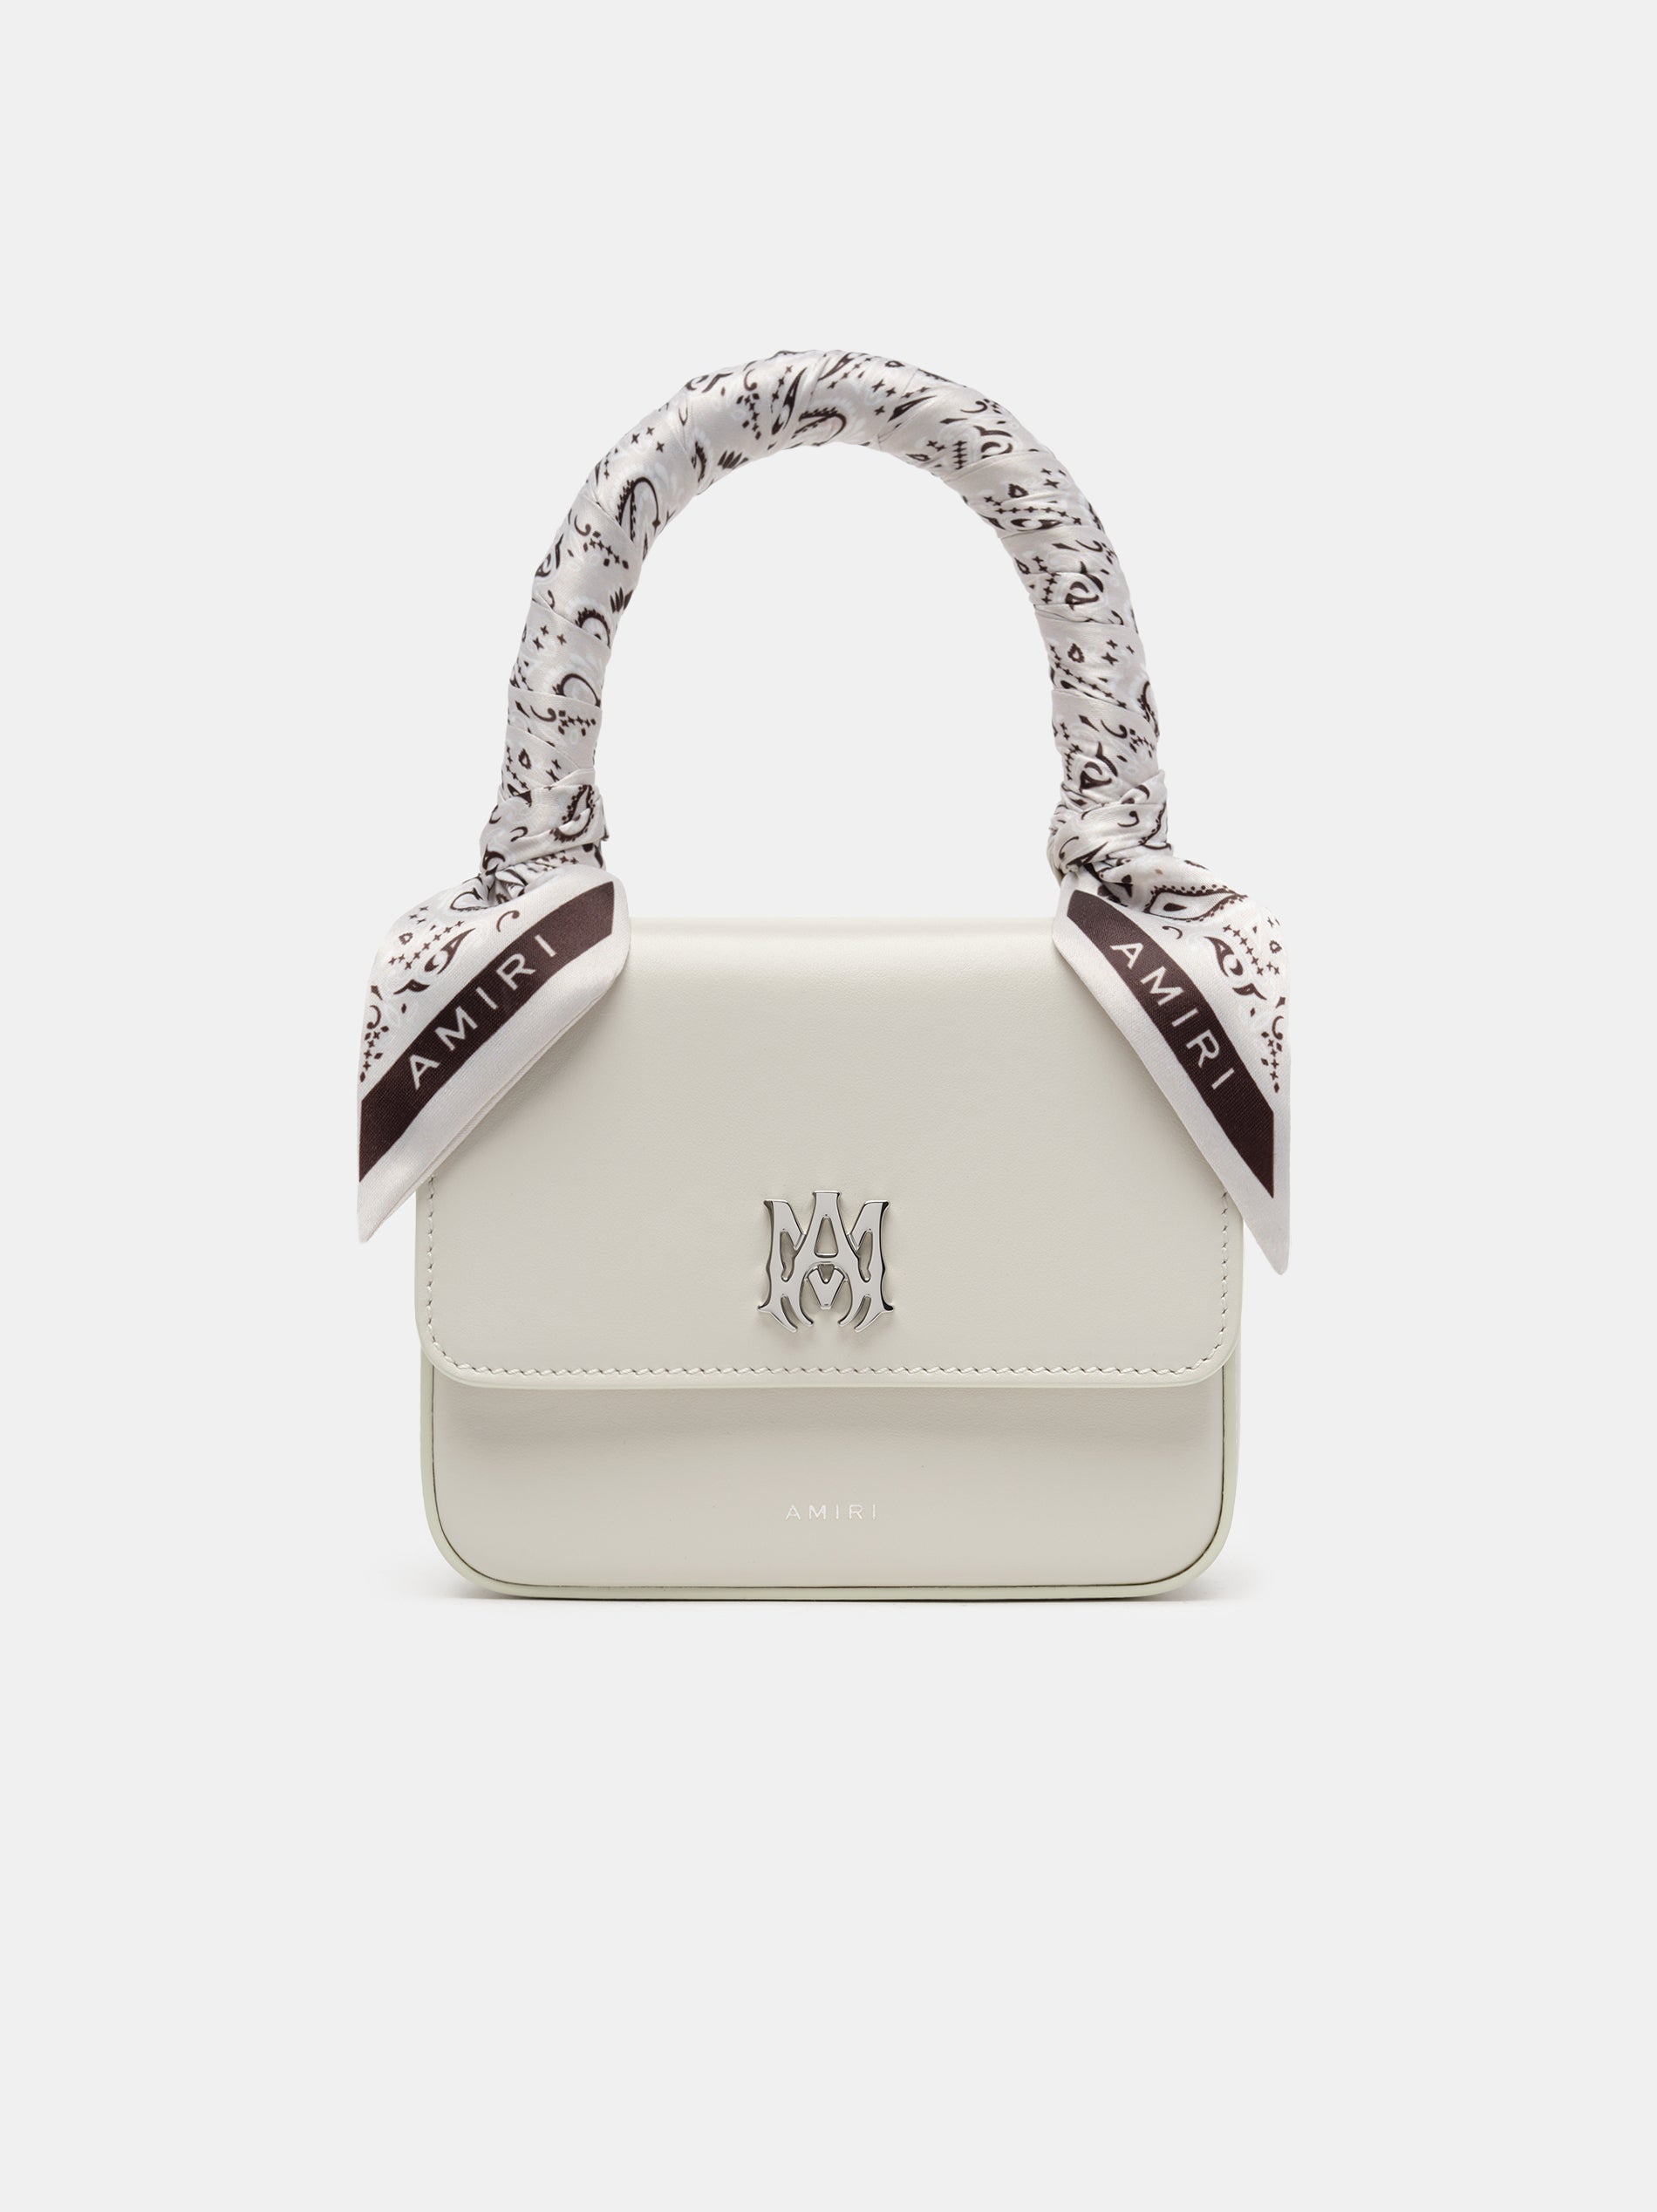 Product WOMEN - MICRO MA BAG - Alabaster featured image